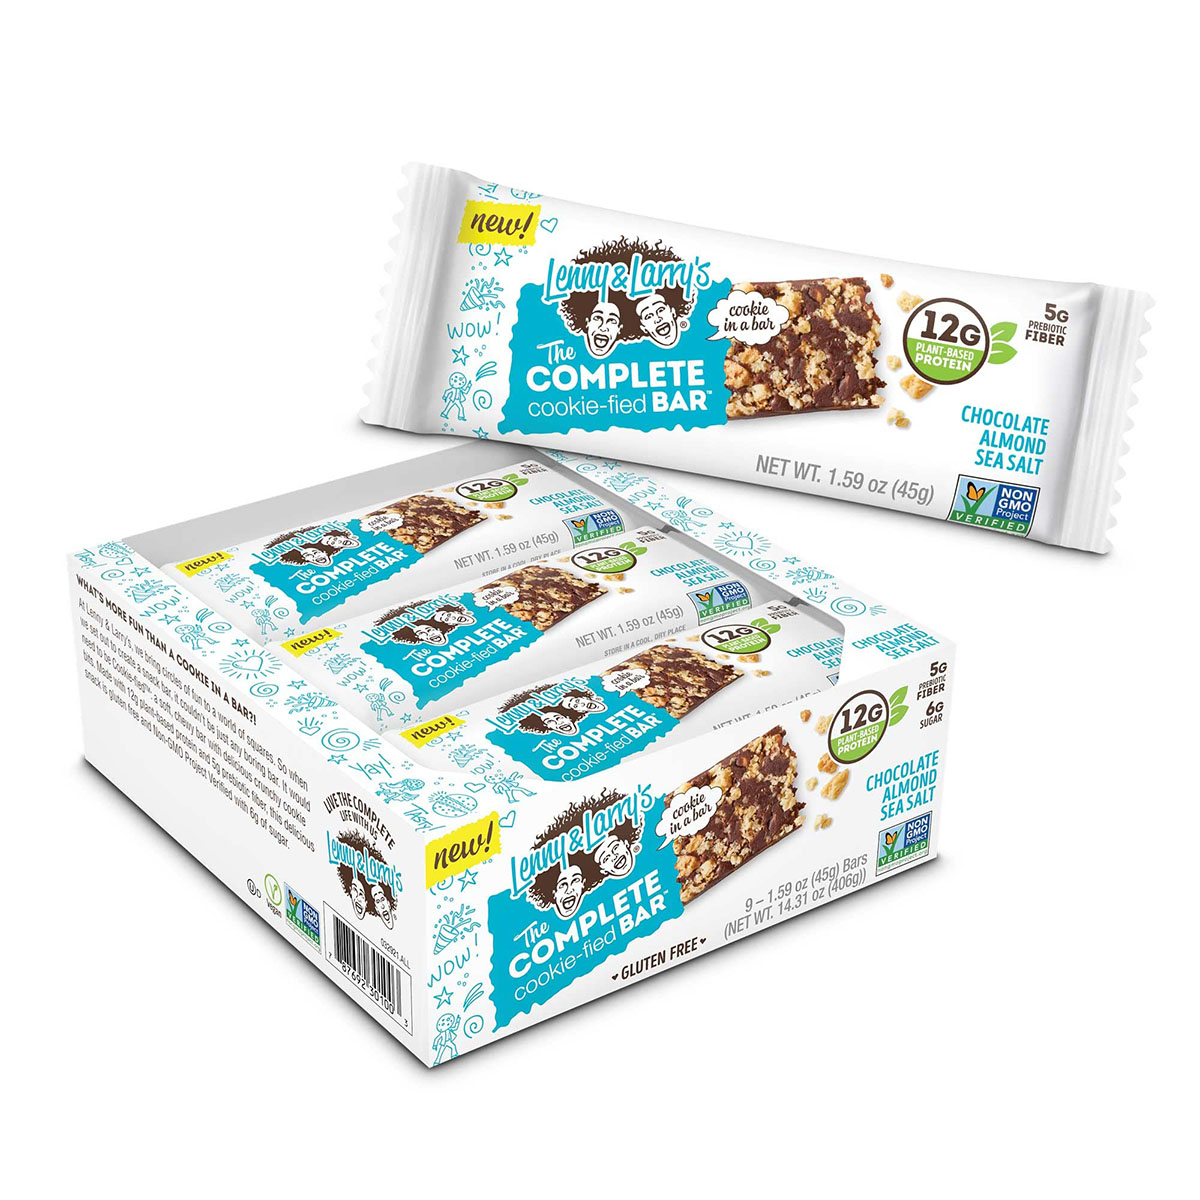 Lenny & Larry’s The Complete Cookie-fied Bar Chocolate Almond Sea Salt Box of 9 Bars